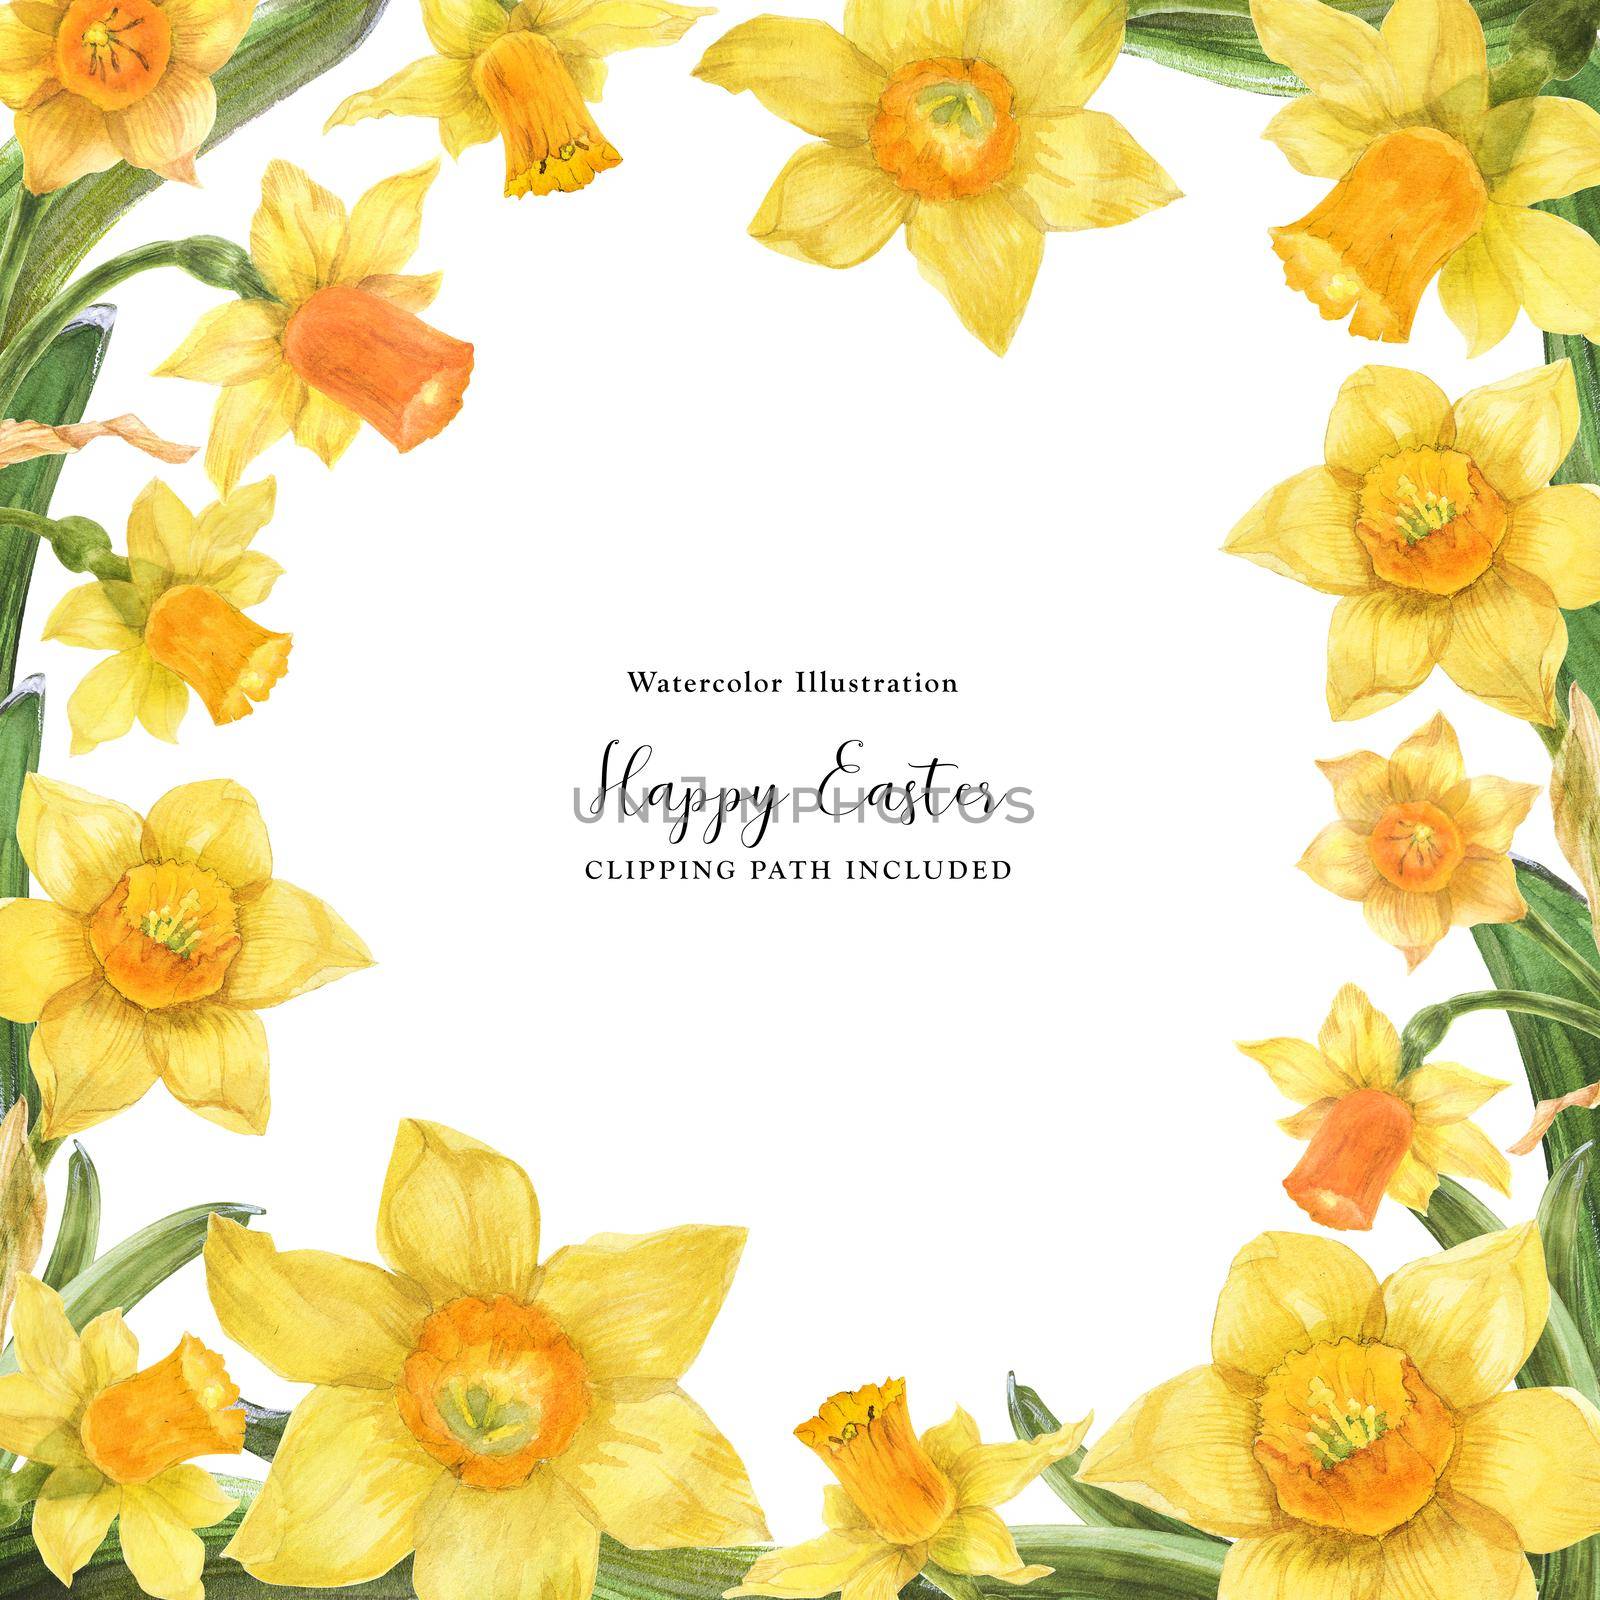 Daffodil watercolor spring floral frame on a white background, clipping path included